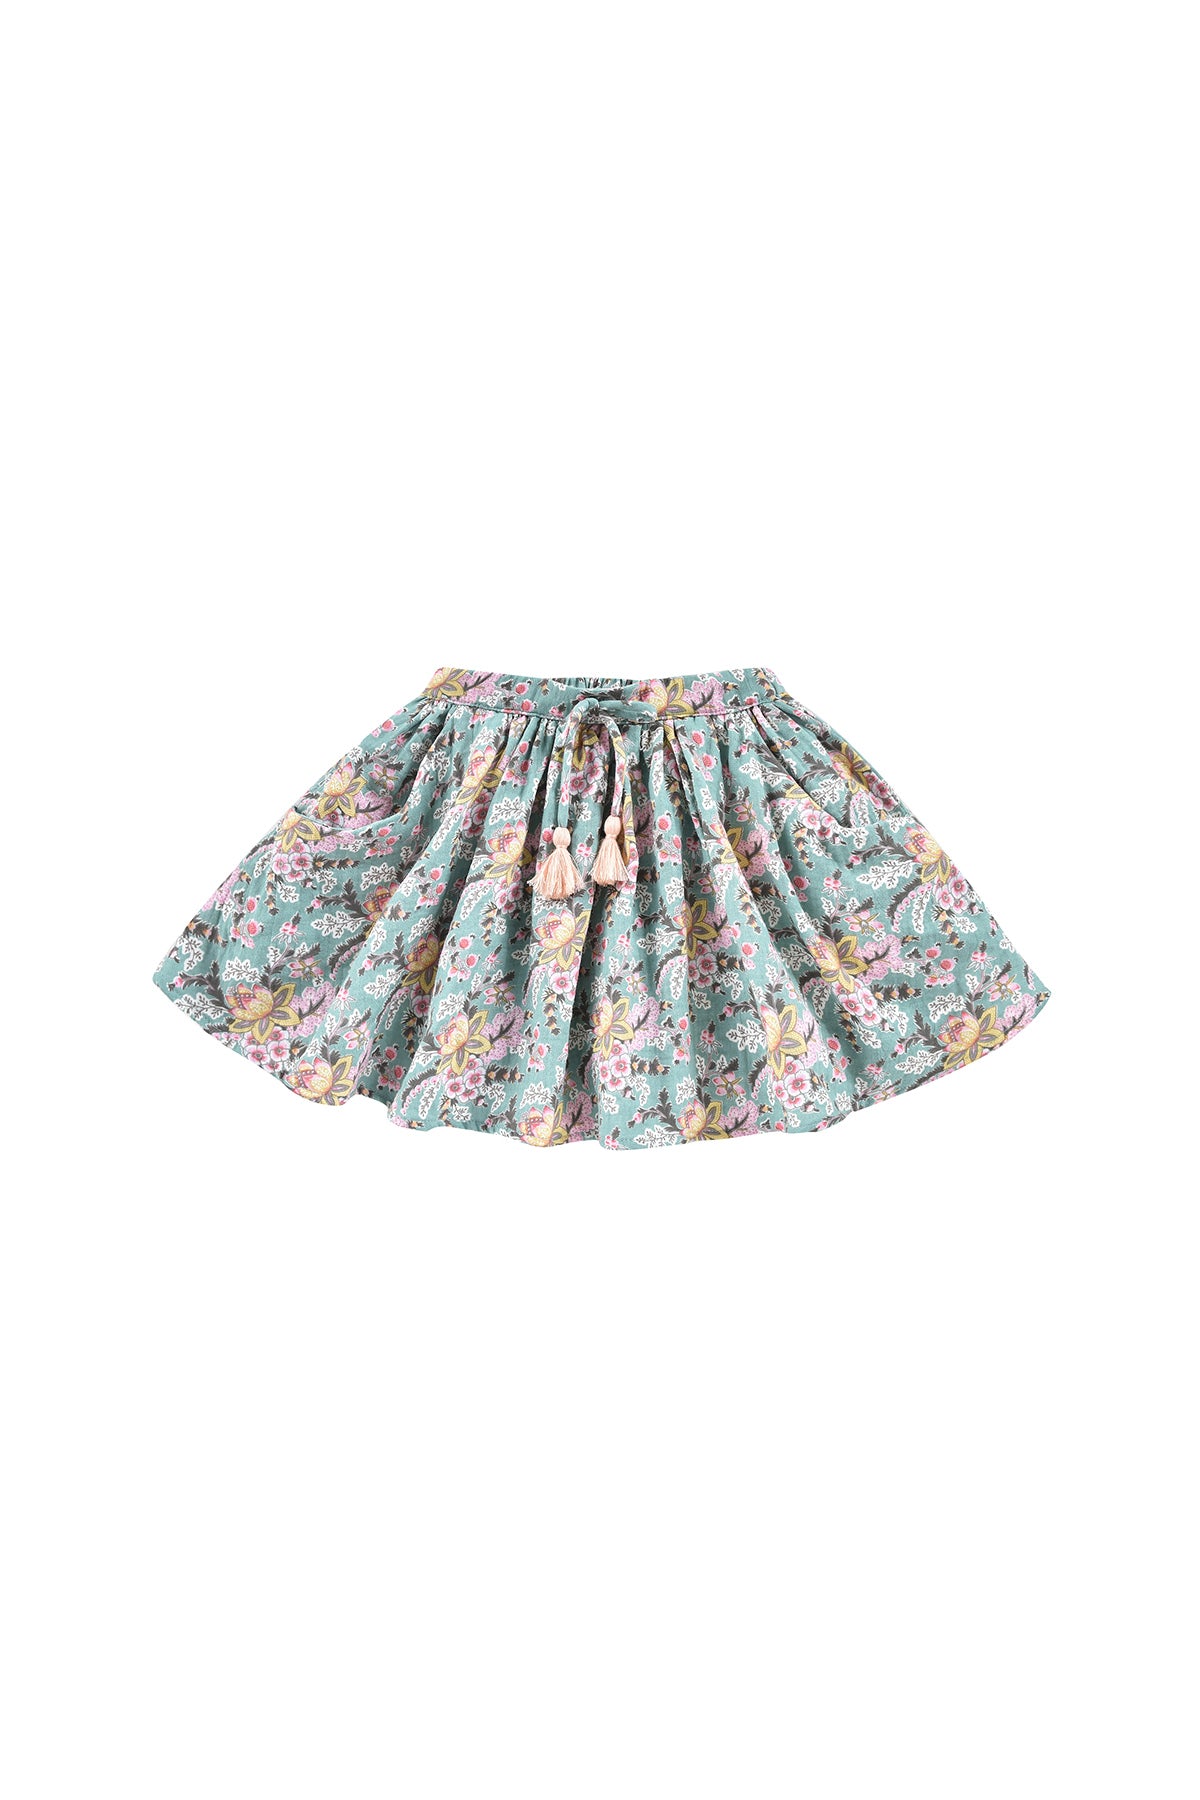 Louise Misha Audrey Skirt - Blue French Flowers